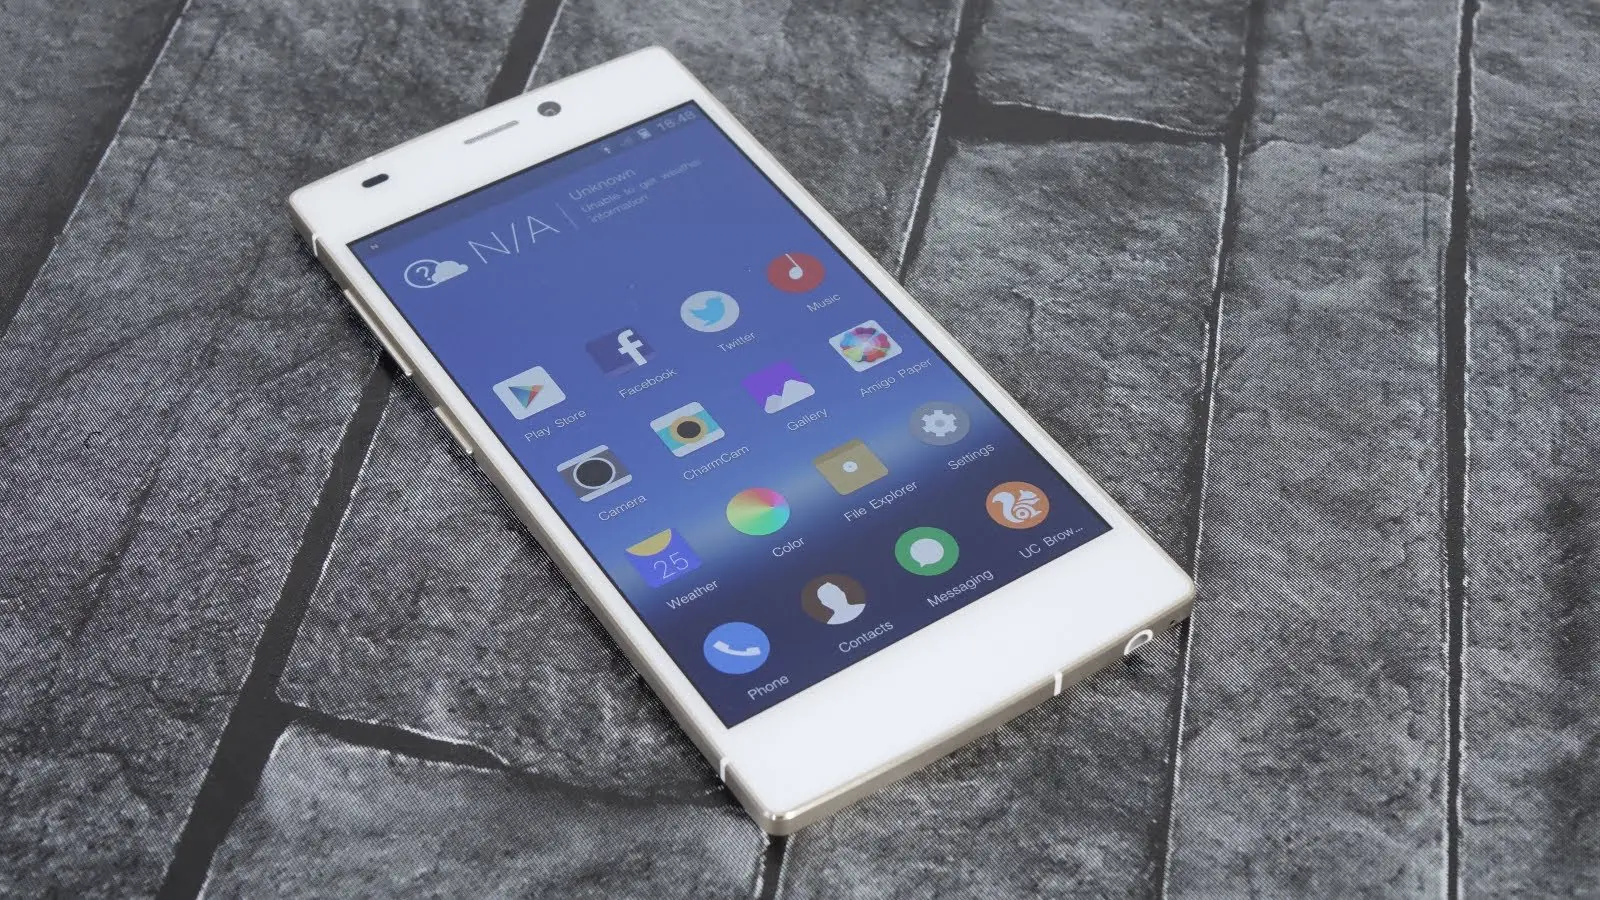 How to Flash Stock Rom on Gionee Elife S5.5